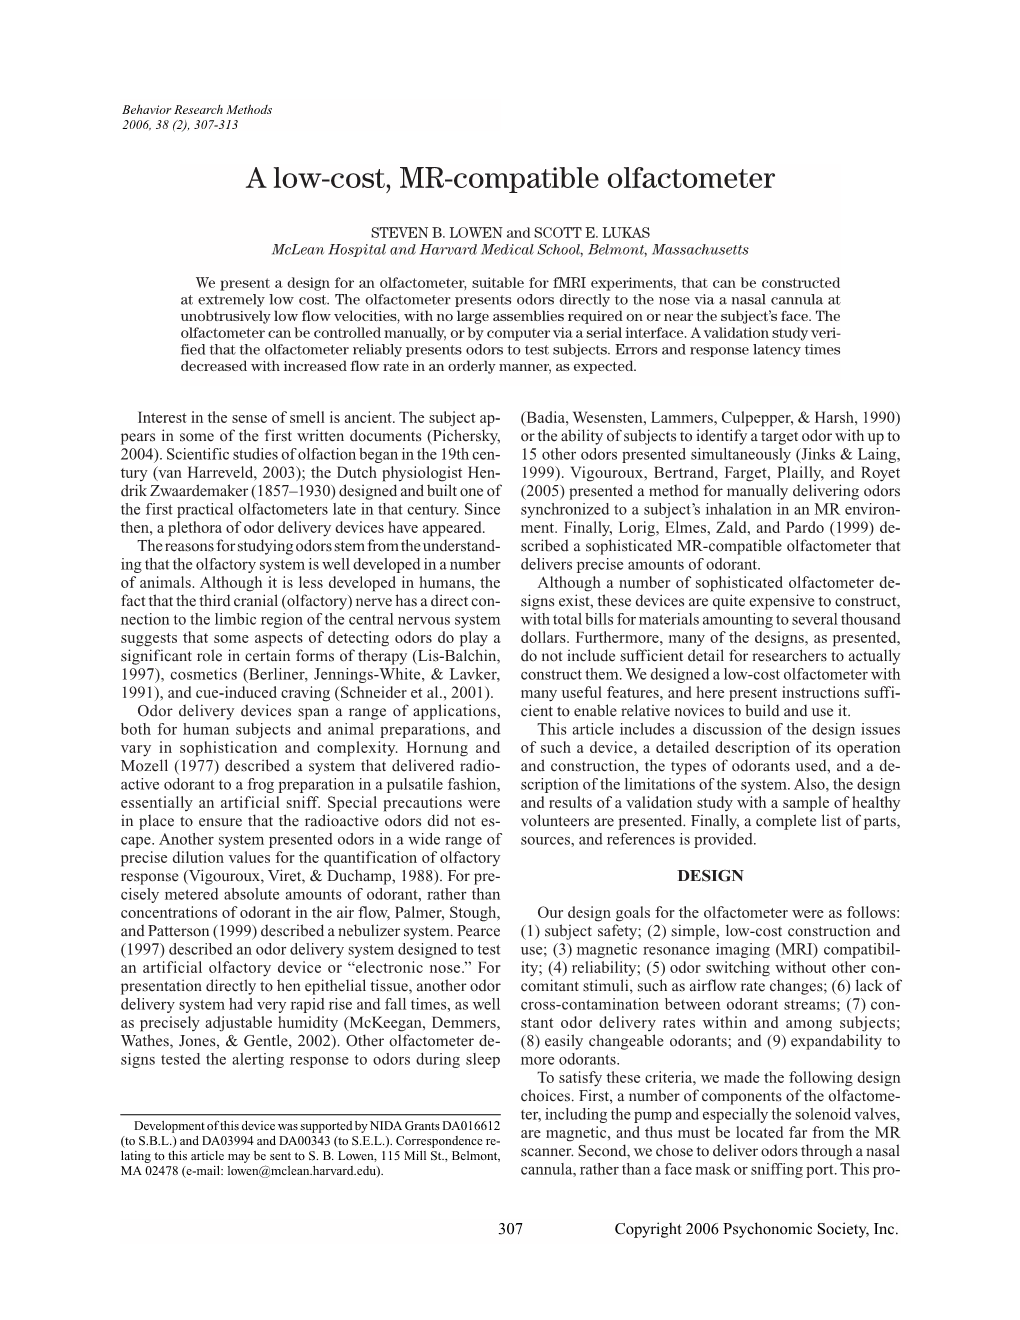 A Low-Cost, MR-Compatible Olfactometer